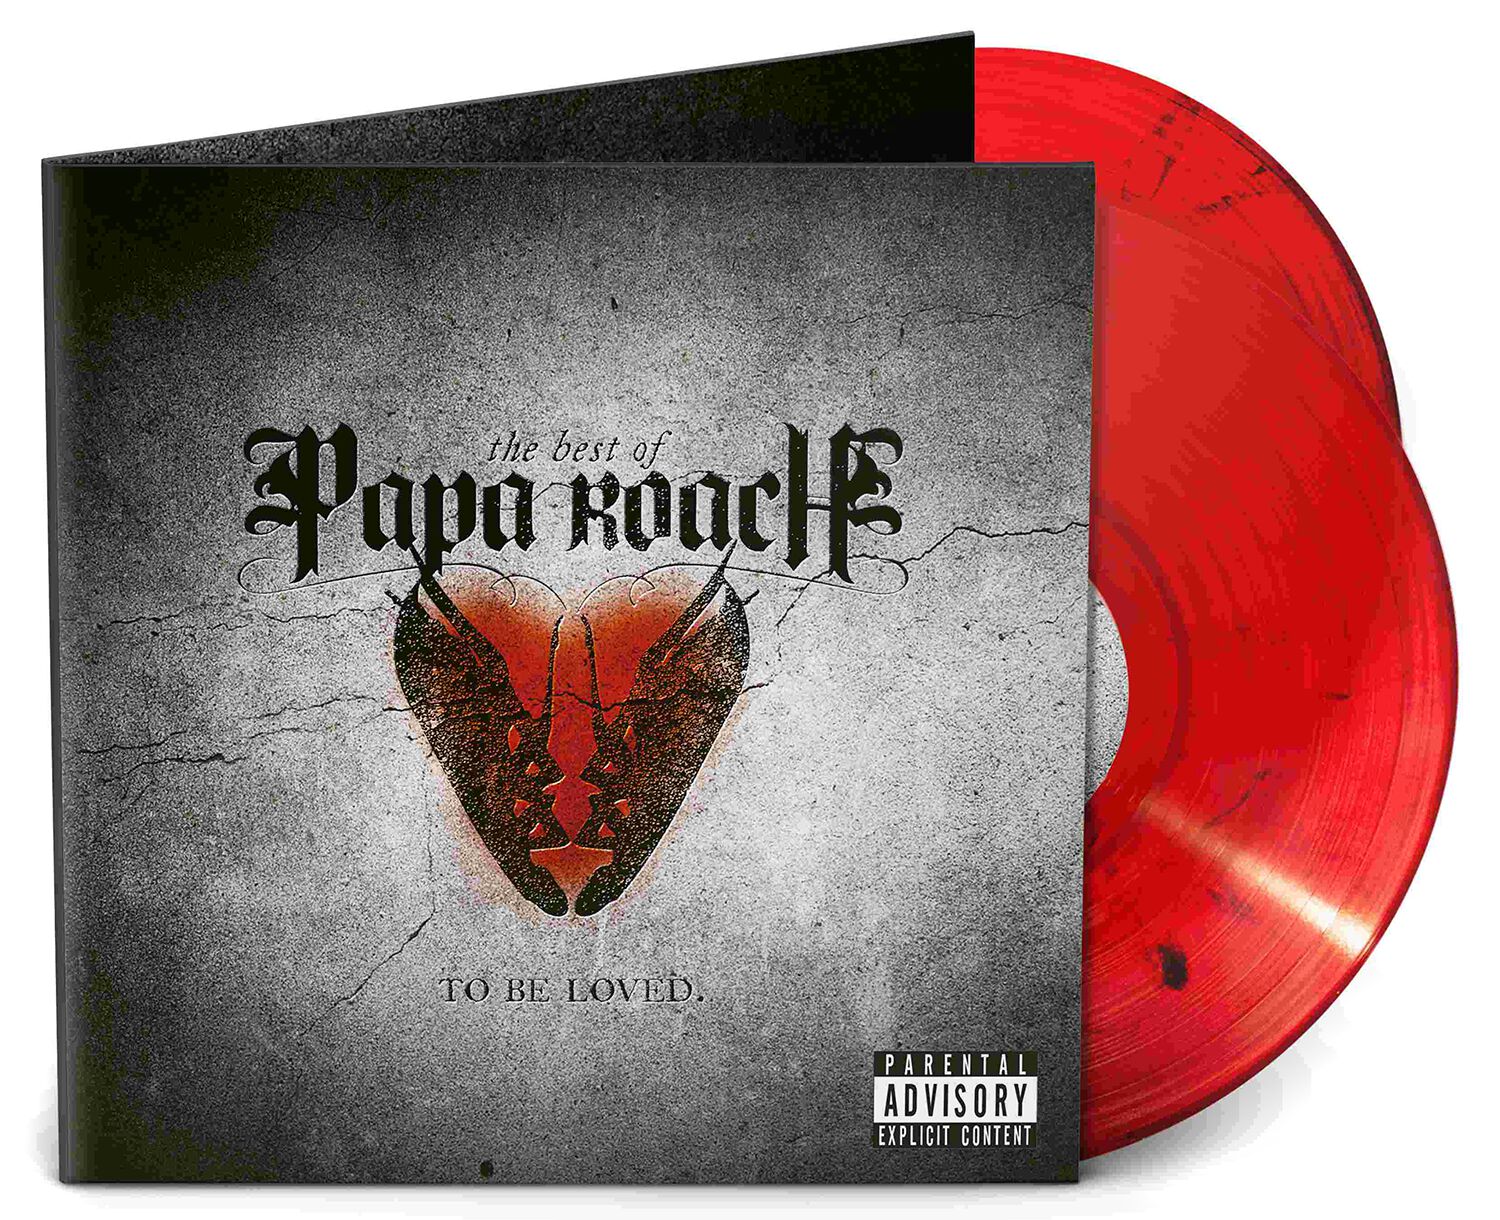 Papa Roach To be loved (Best of) LP farbig